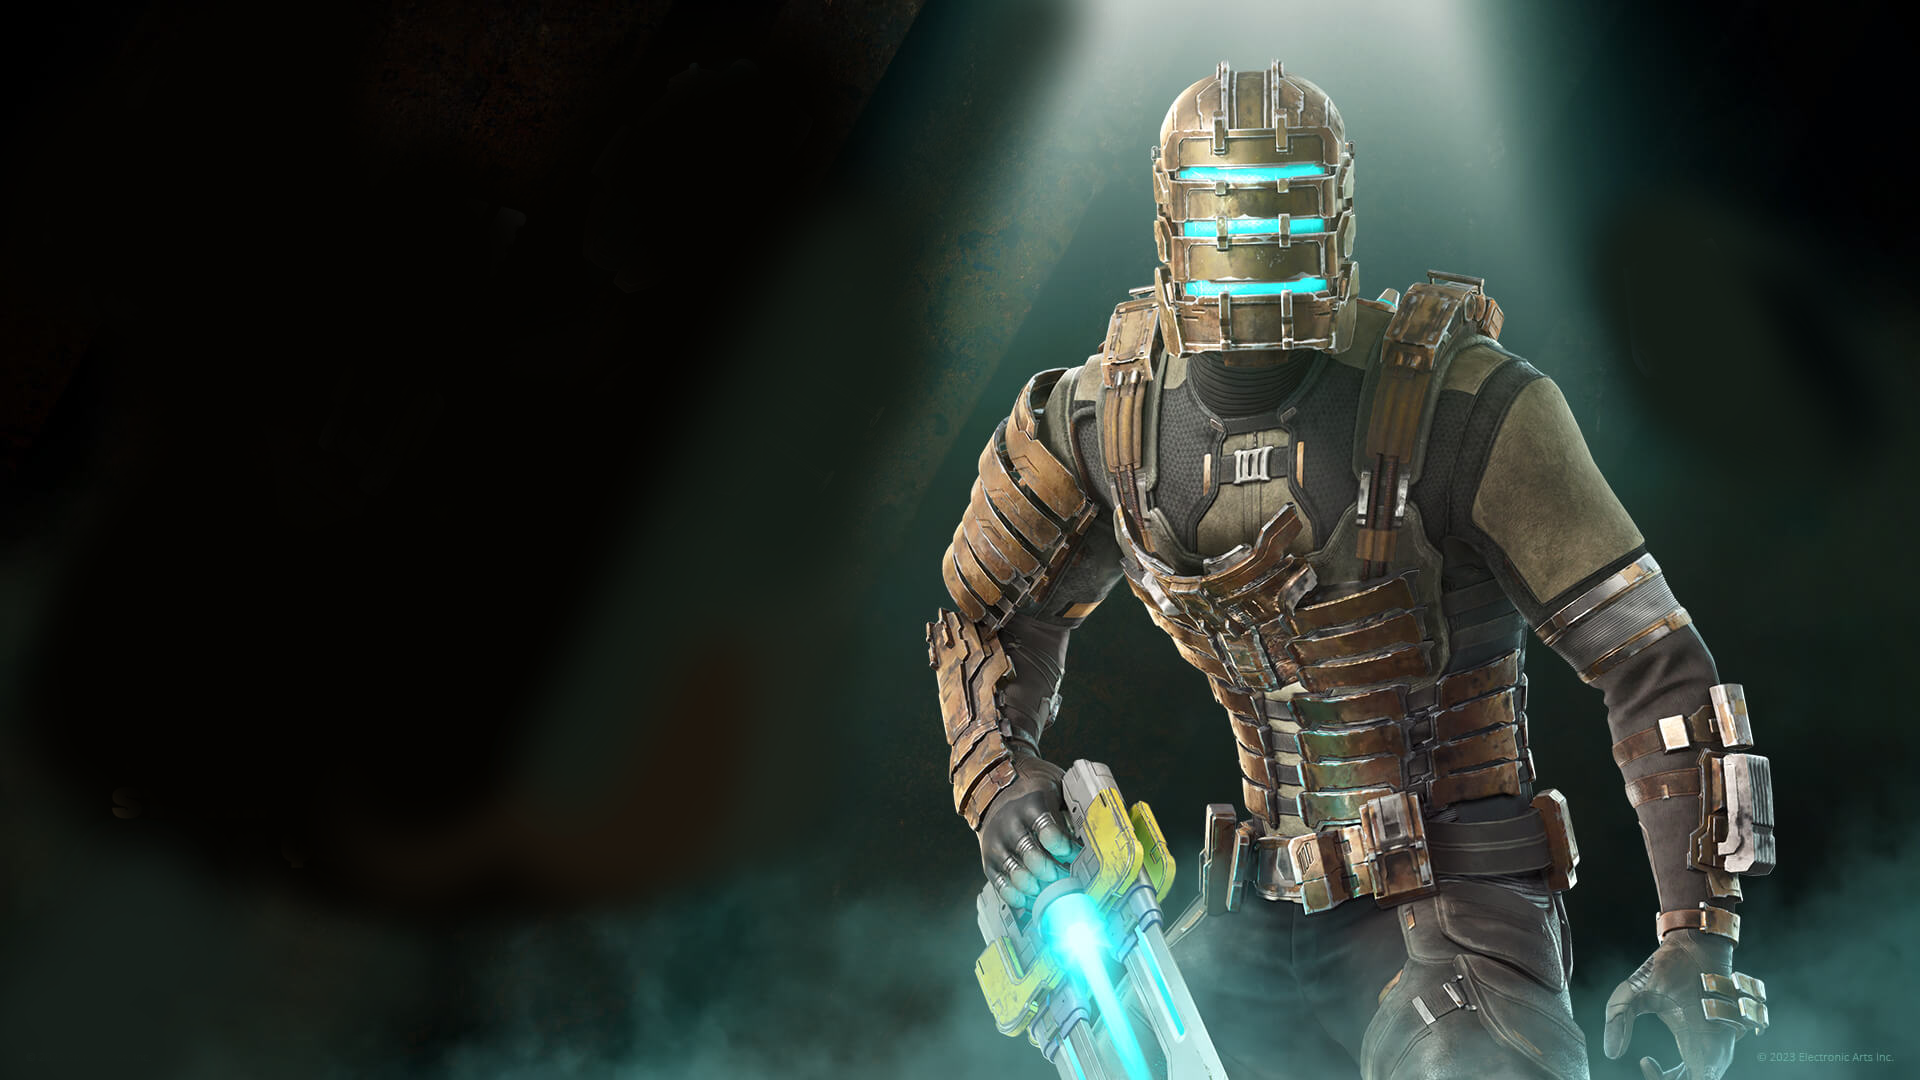 Fortnite - Dead Space’s Isaac Clarke poses in his RIG armor and plasma cutter, surrounded by mysterious mist